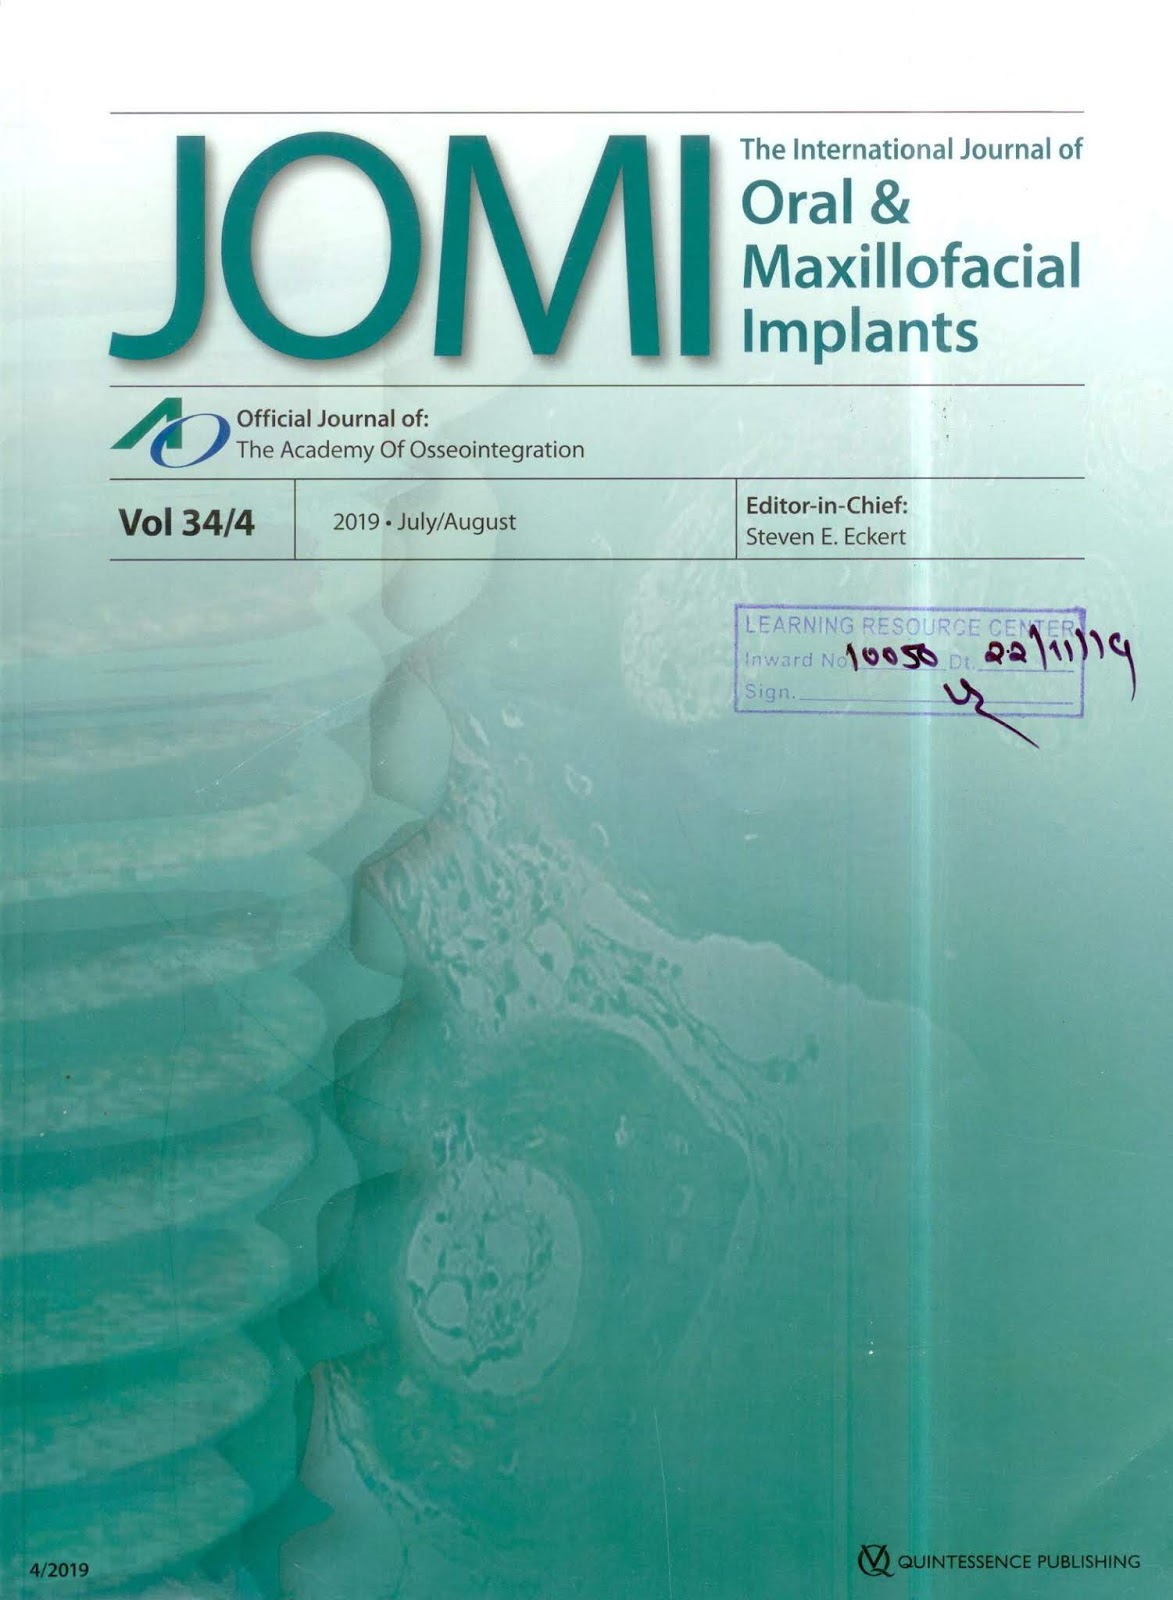 http://www.quintpub.com/journals/omi/journal_contents.php?iss_id=1622&journal_name=OMI&vol_year=2019&vol_num=34#.XdfidLim_CM